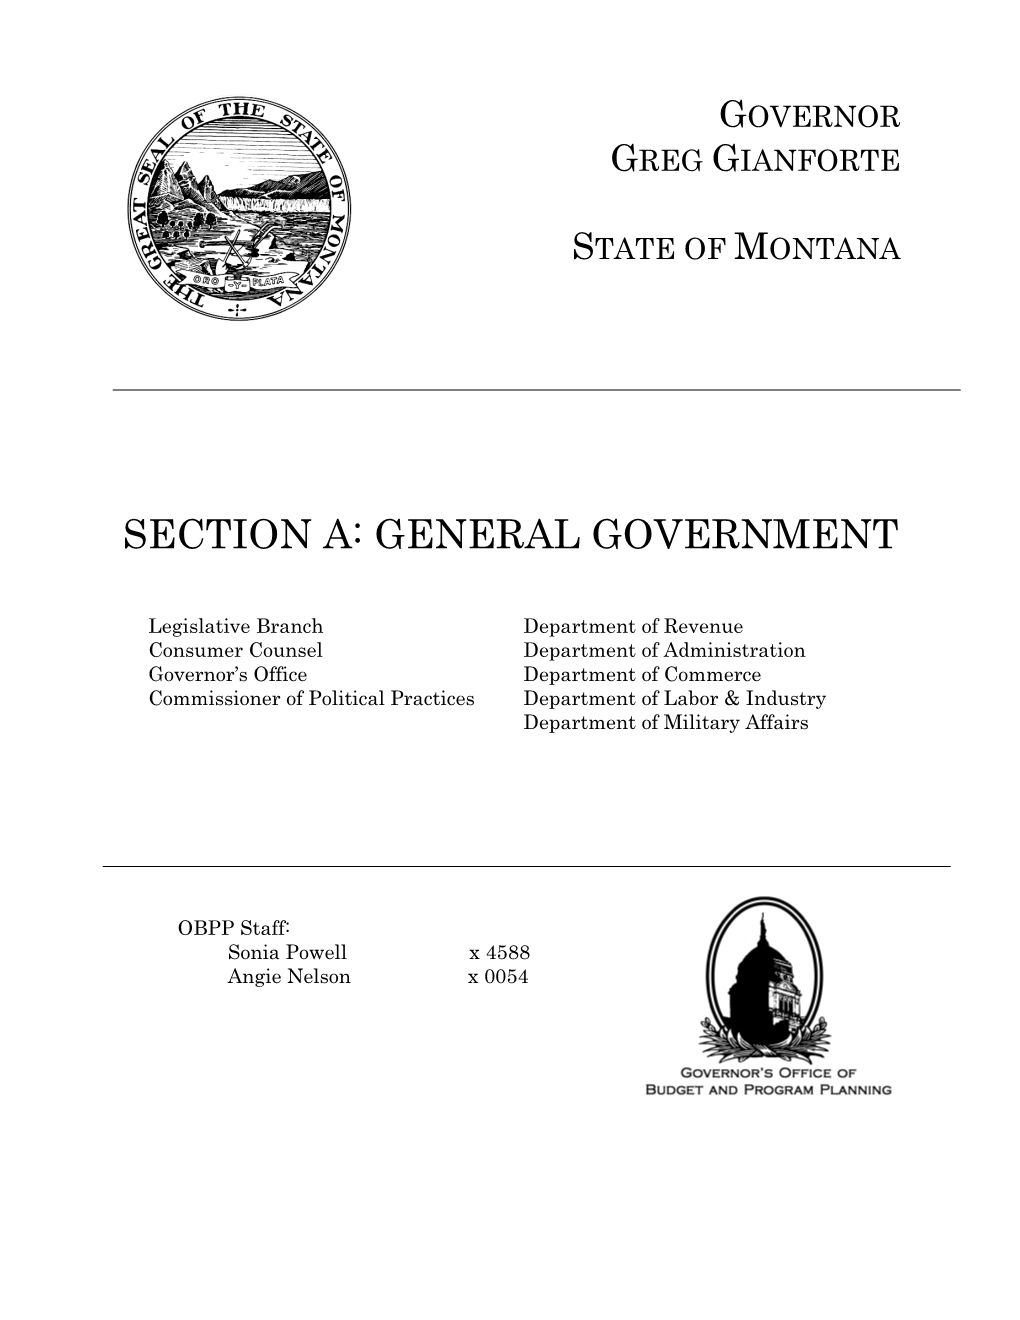 Section A: General Government